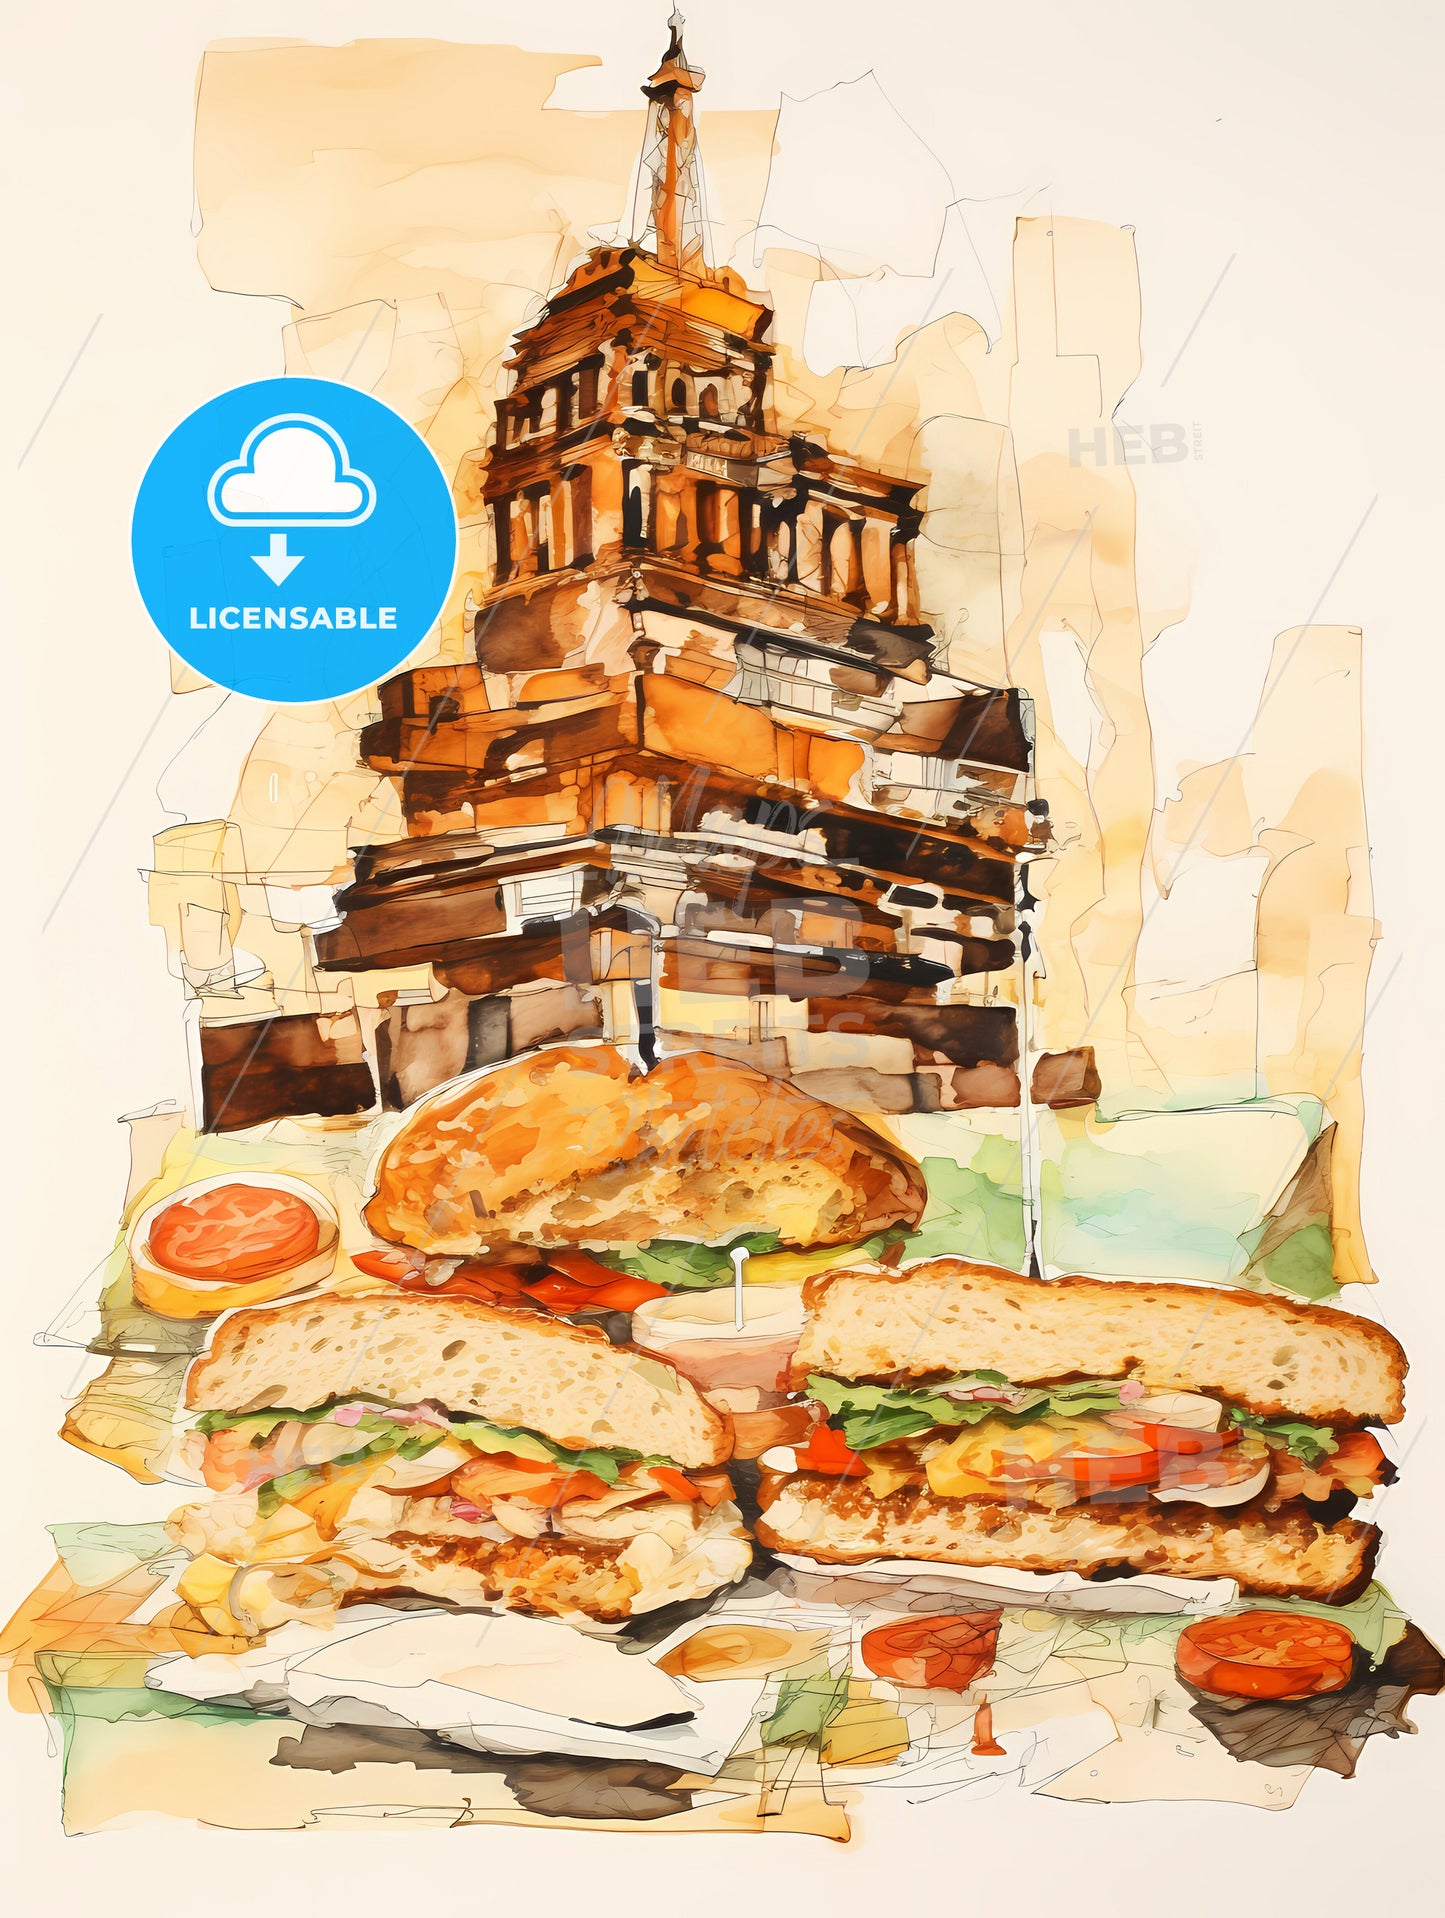 Illustration Of A Sandwich, A Watercolor Of A Sandwich And A Building